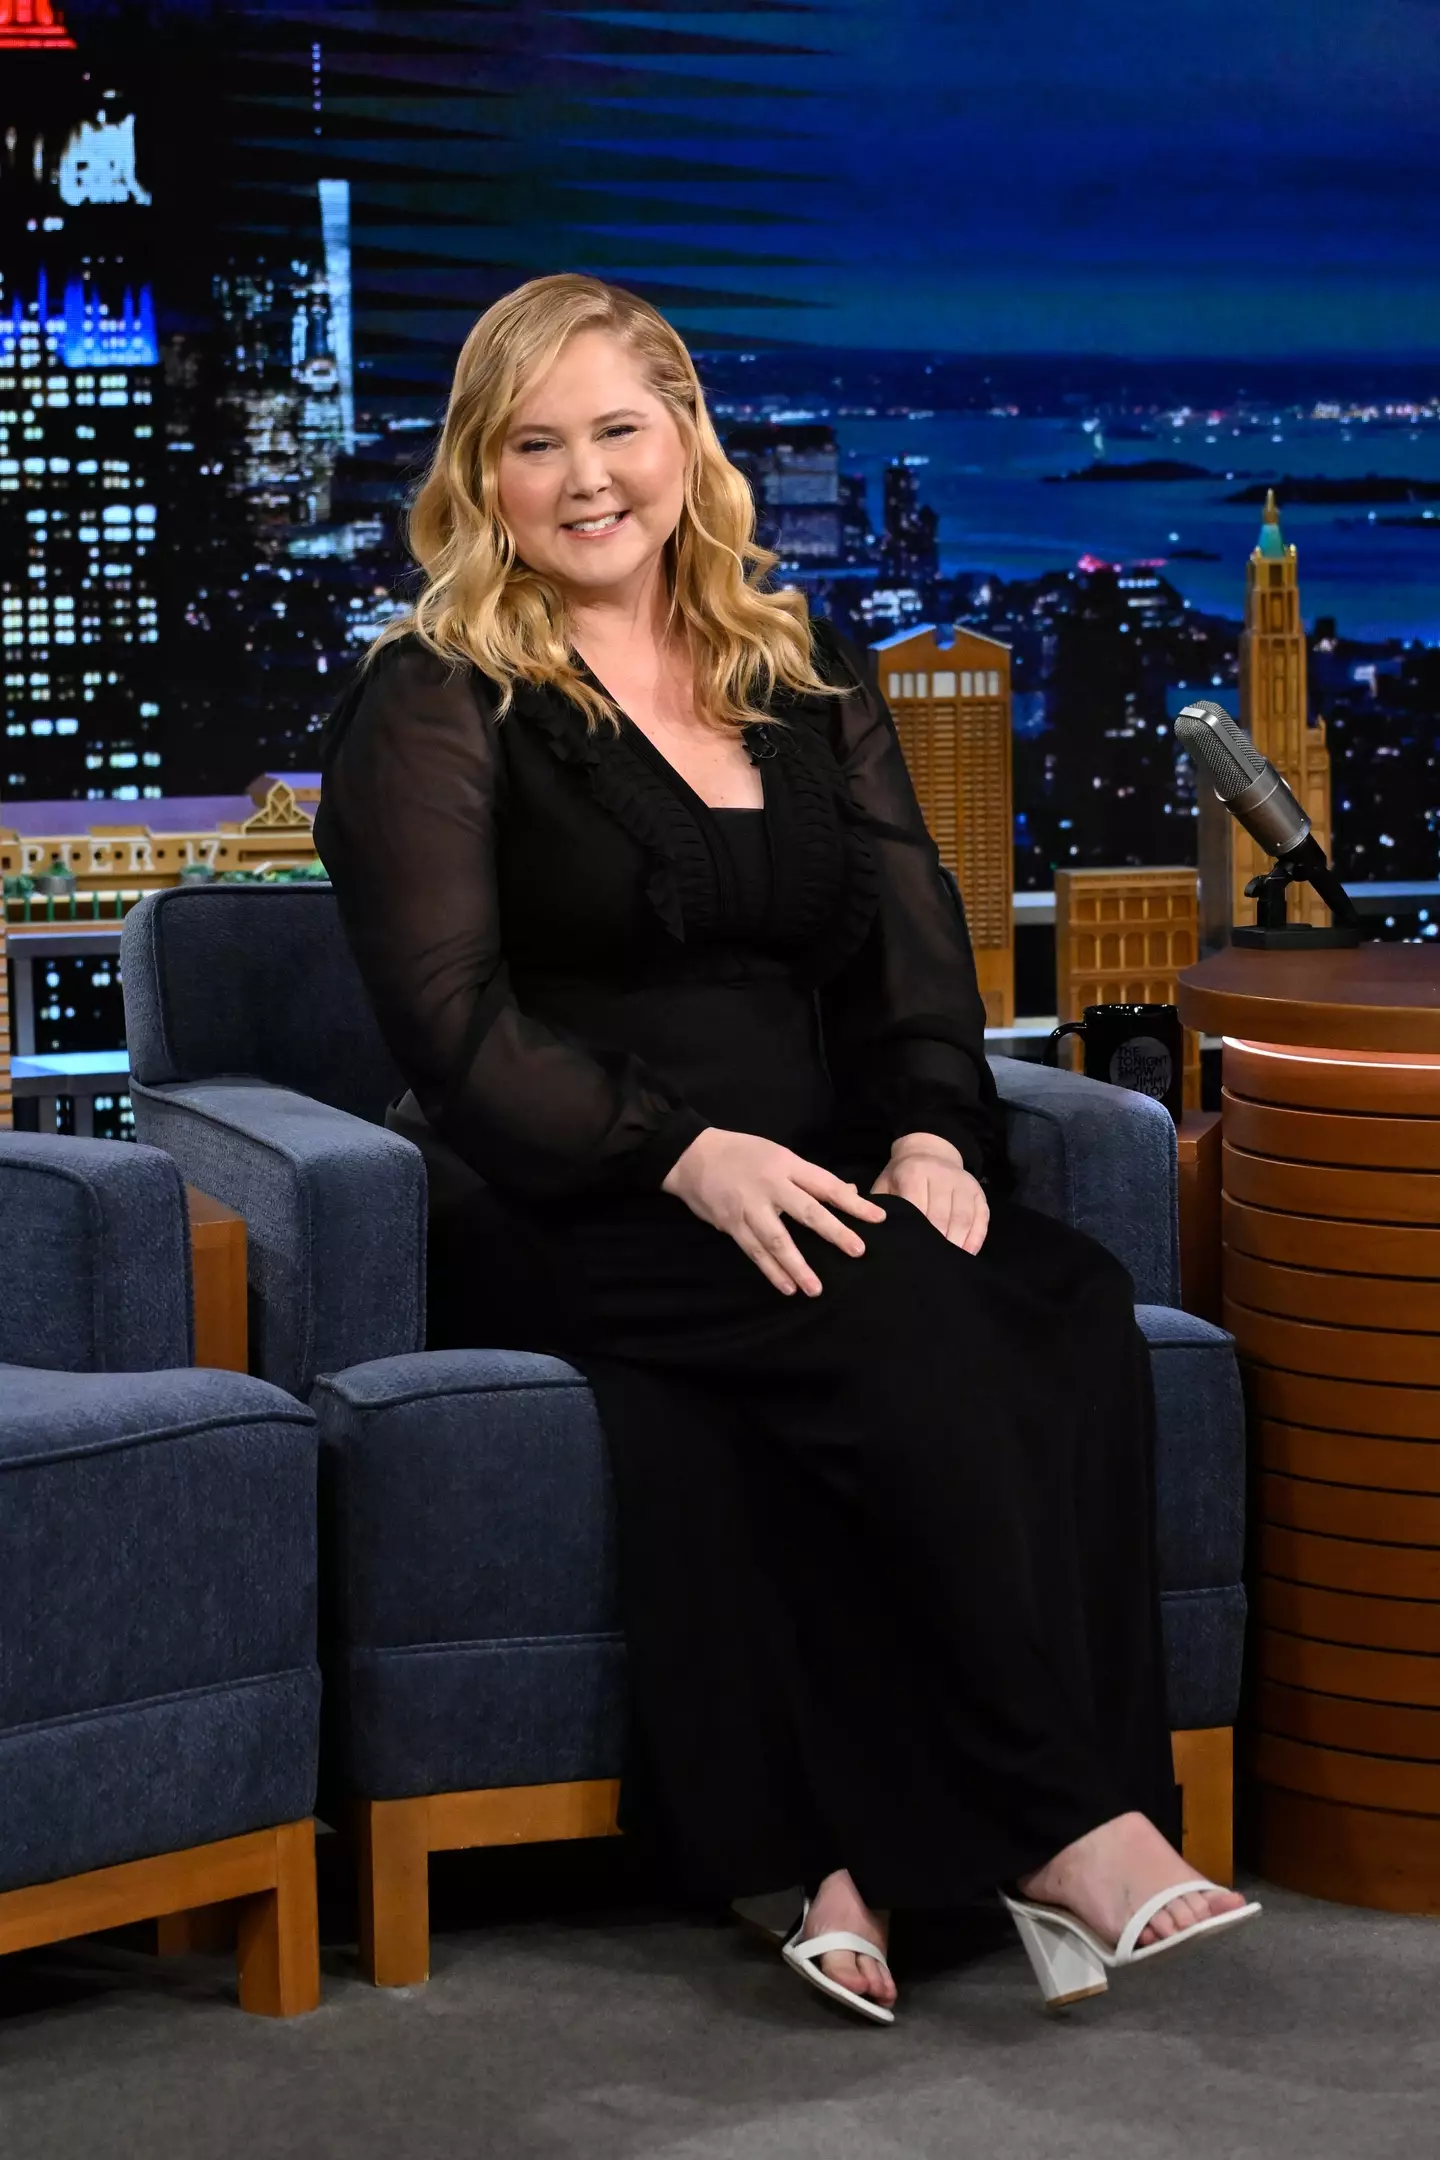 Amy Schumer on The Tonight Show.